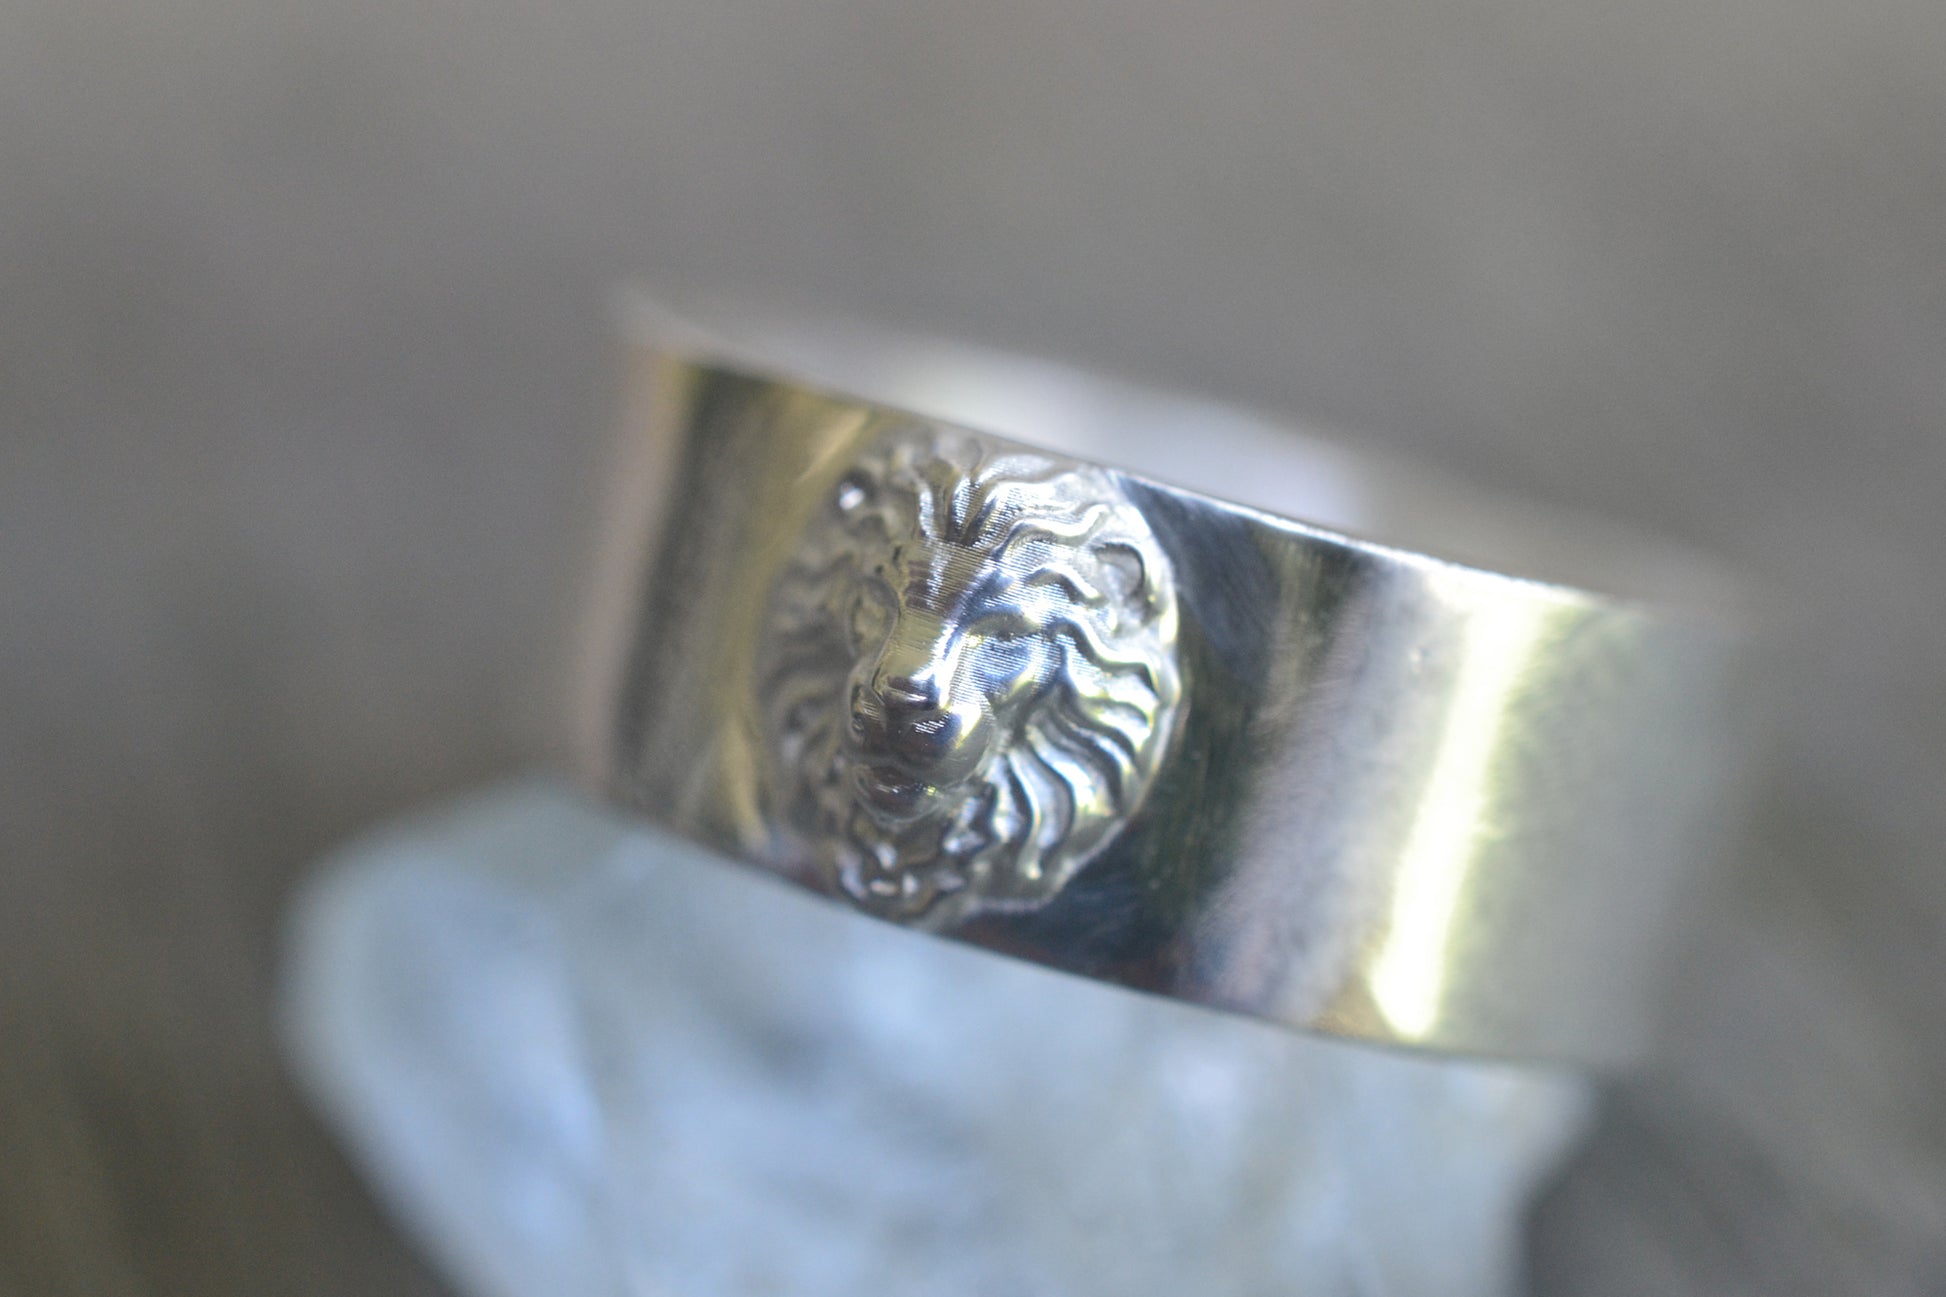 8mm Wide Sterling Silver Lion Band